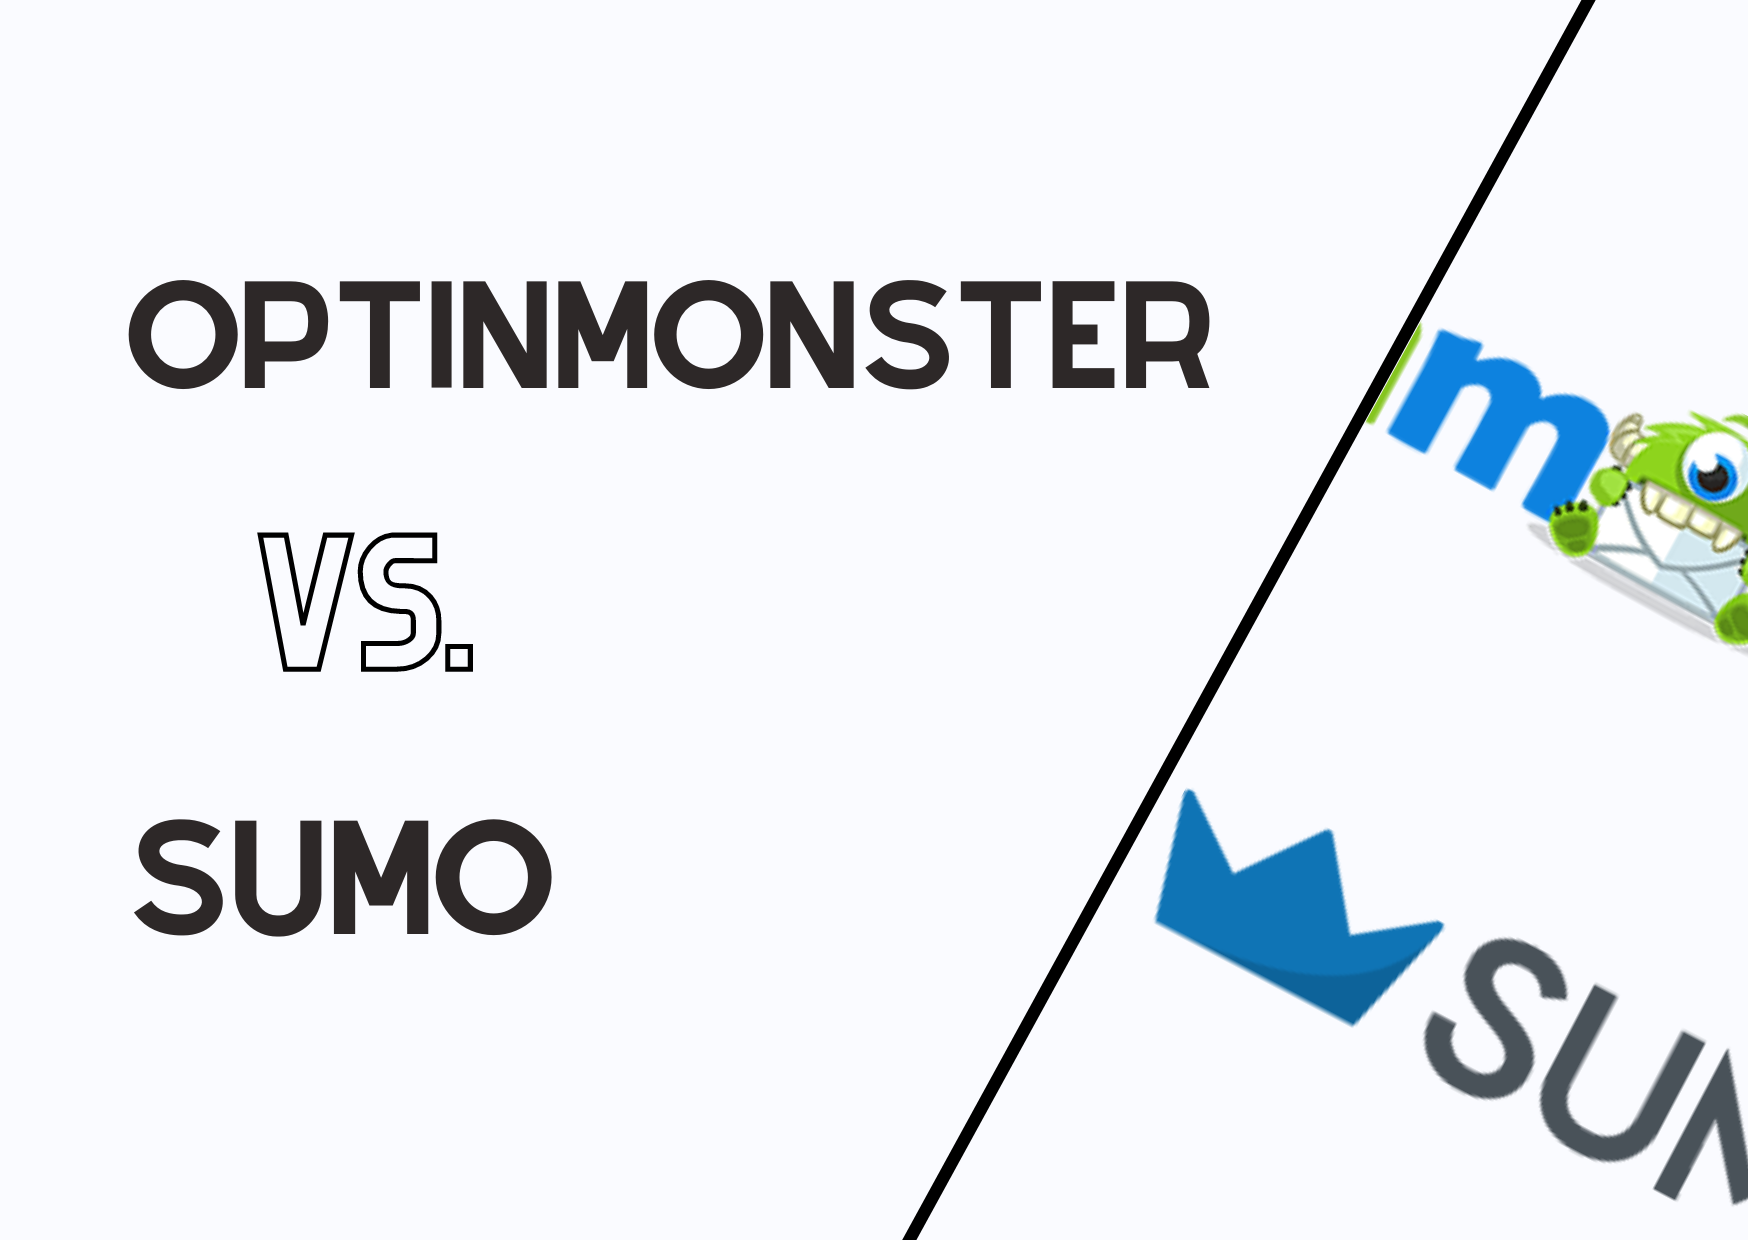 the banner of OptinMonster and Sumo supported with the title and their logos